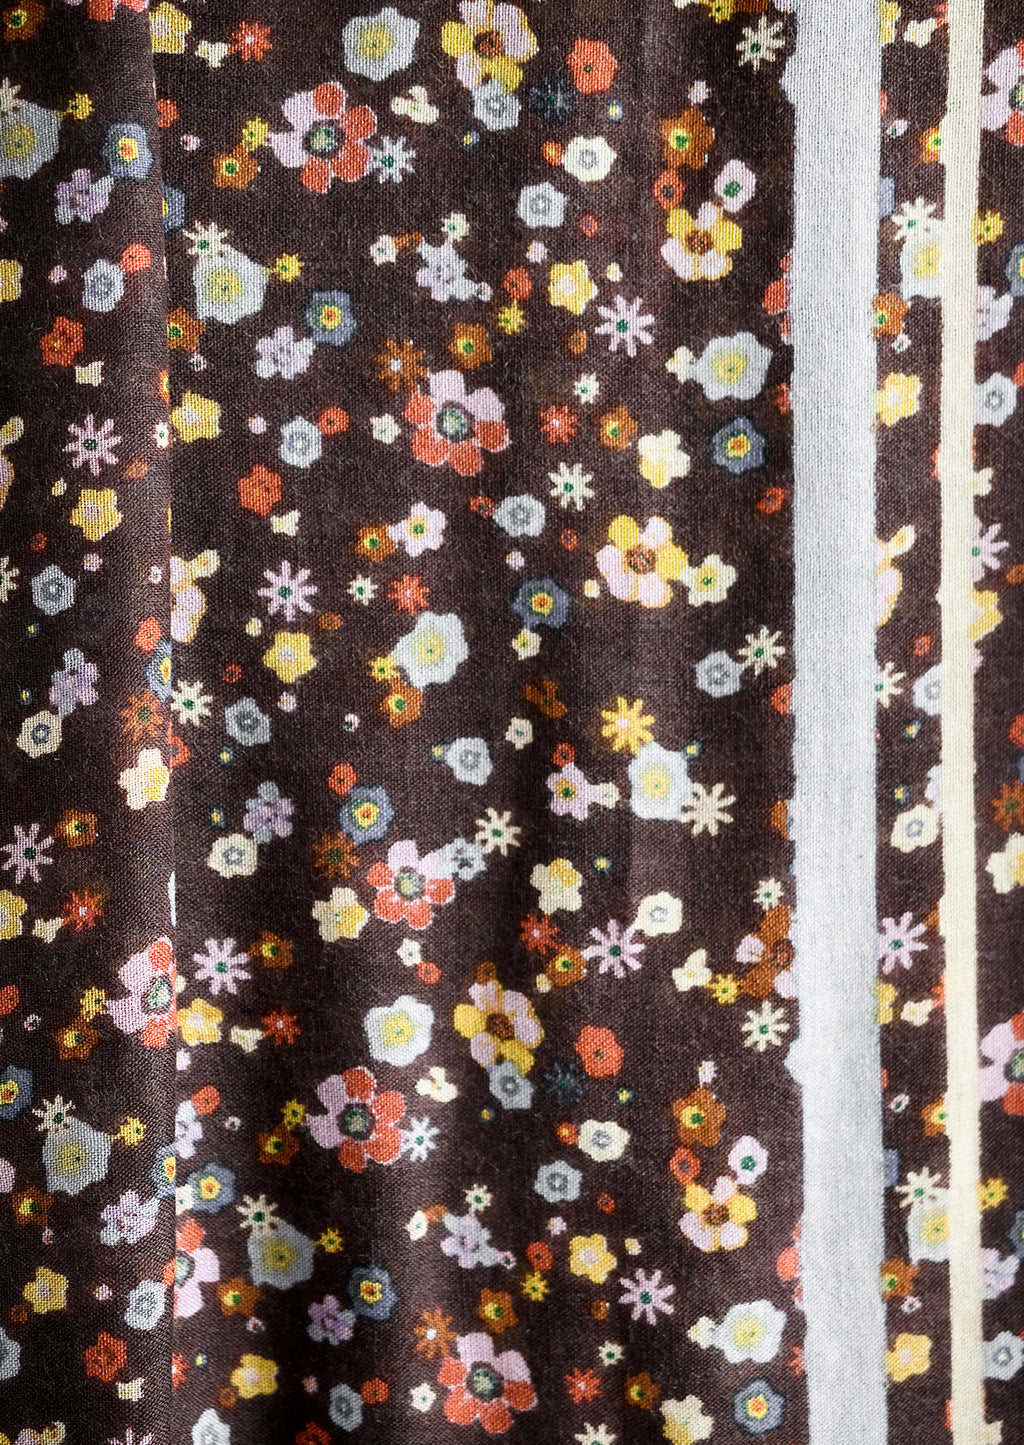 3: A floral print scarf with brown background and yellow and lilac border.